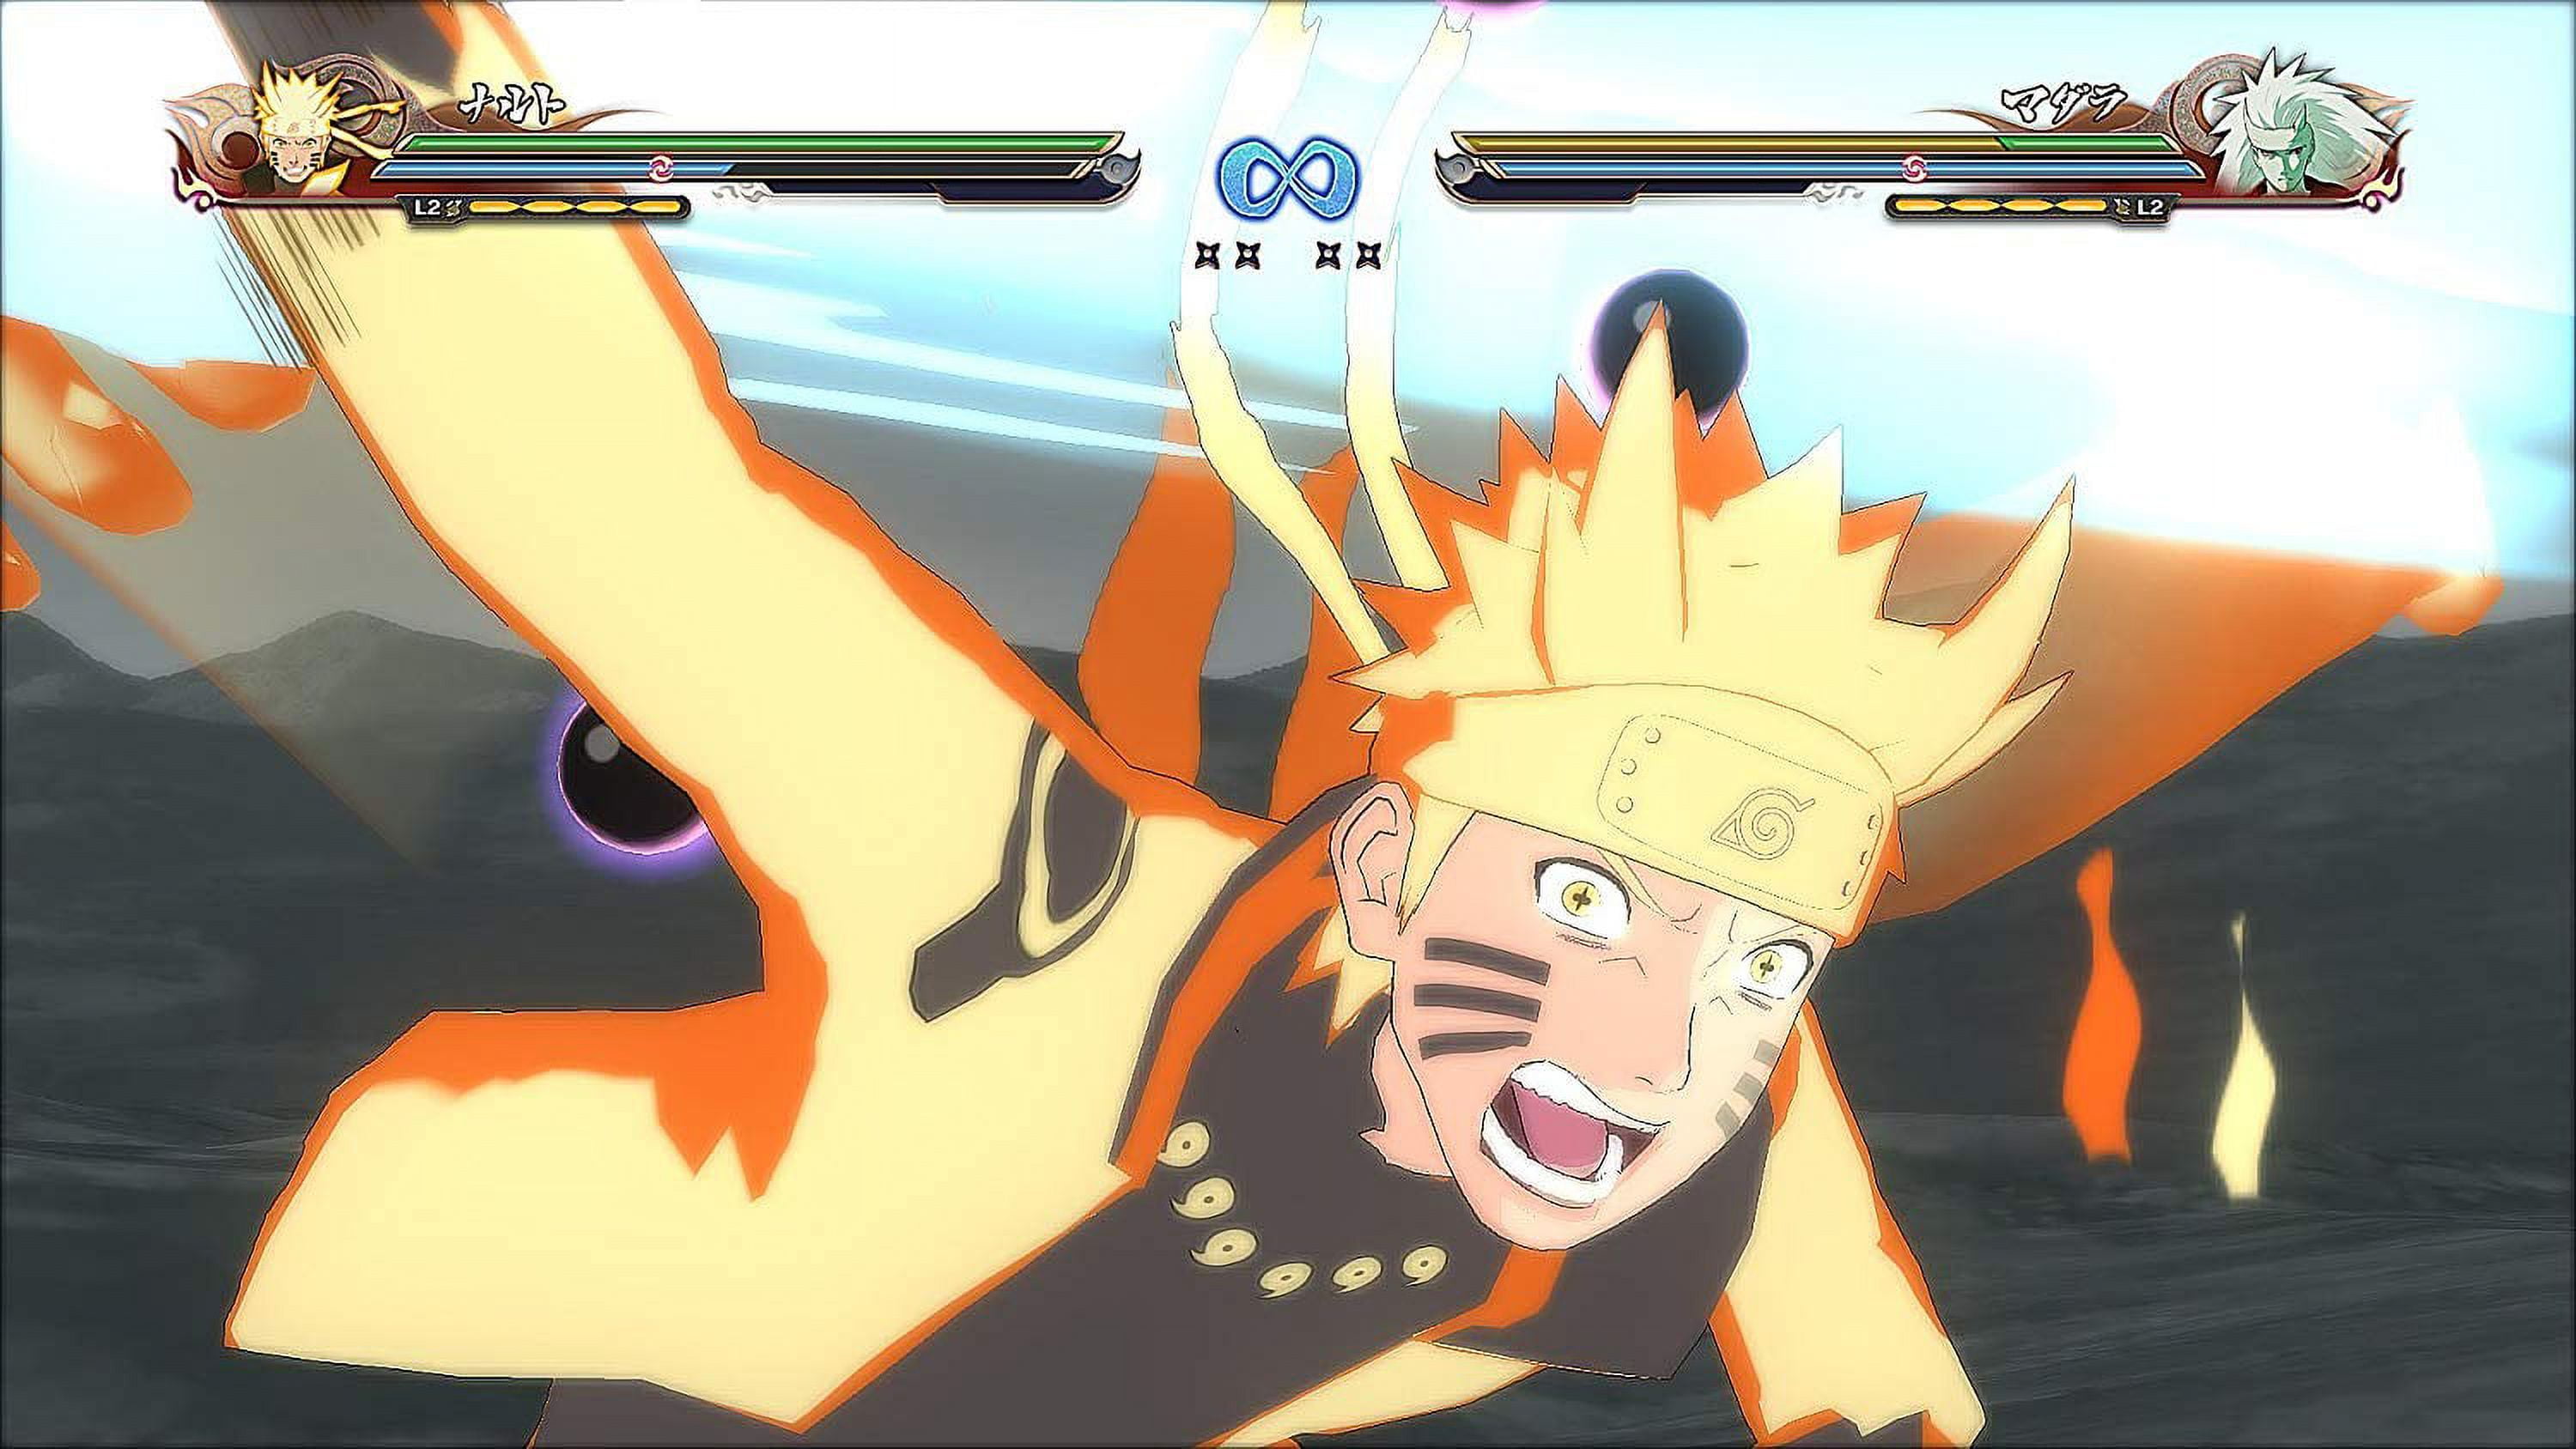 Naruto Shippuden: Ultimate Ninja Storm 4 for PlayStation 4 [New Video Game]  PS 722674120128 